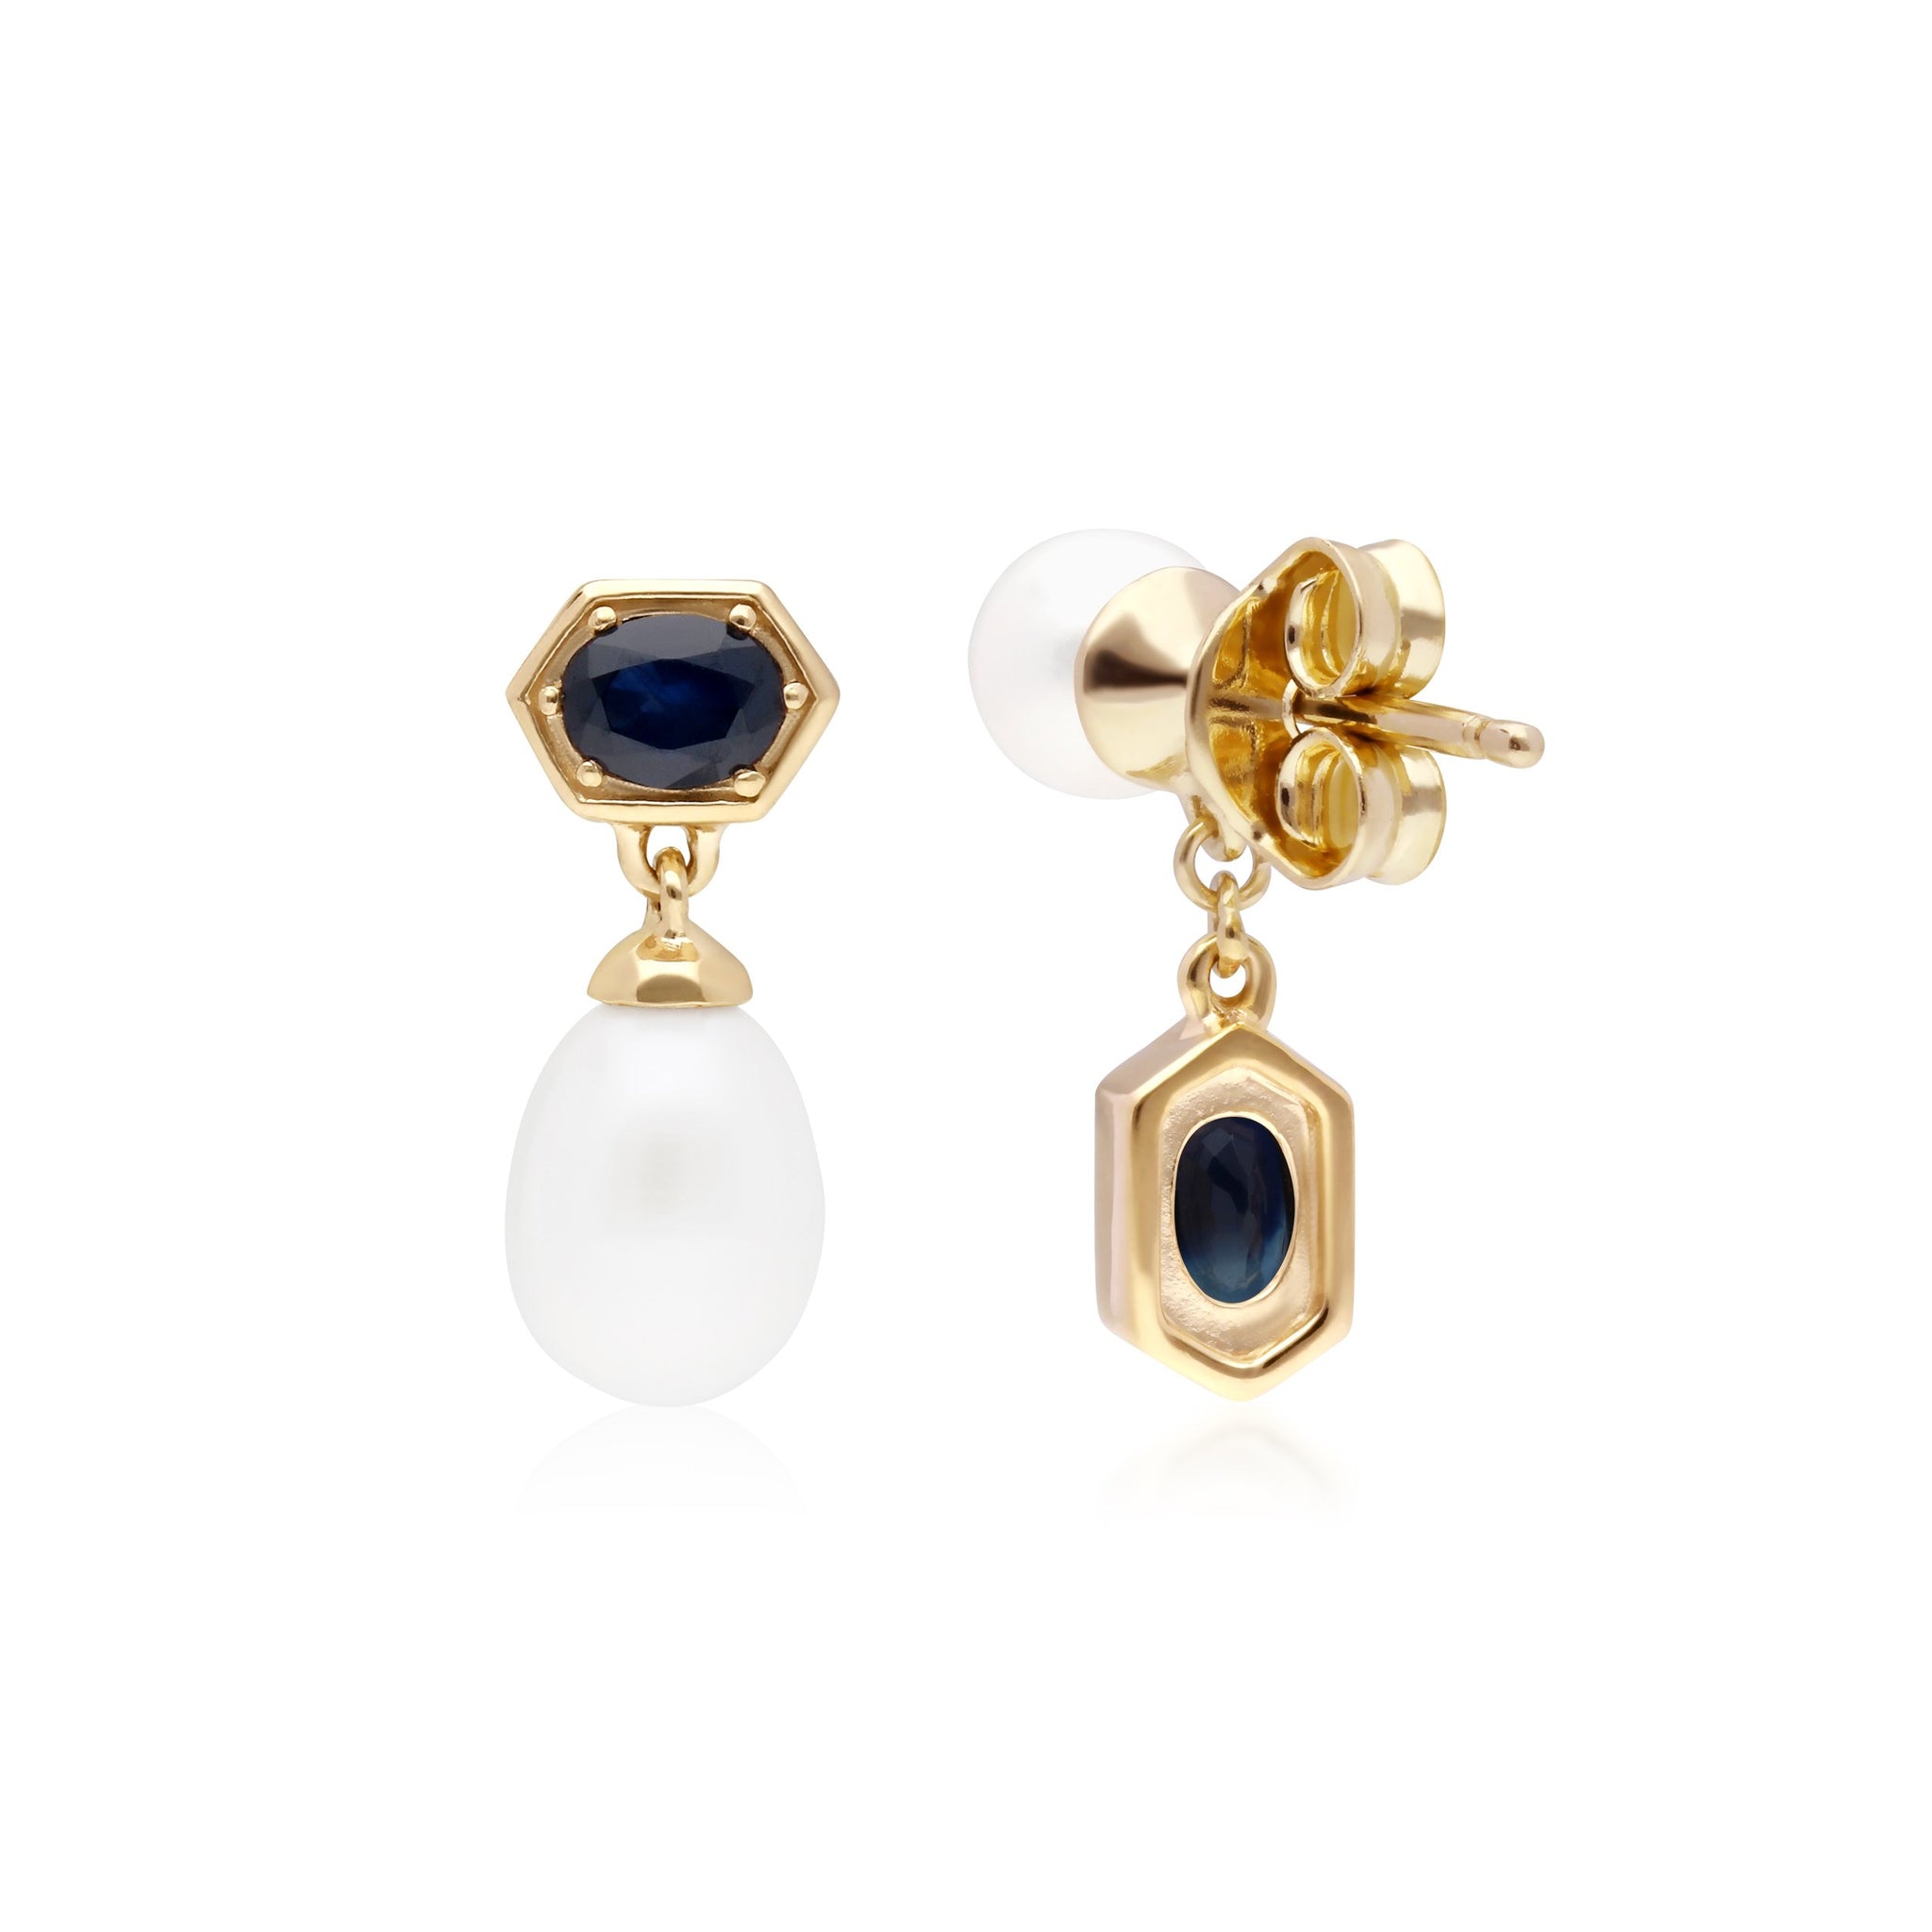 Modern Pearl & Sapphire Mismatched Drop Earrings in Gold Plated Sterling Silver